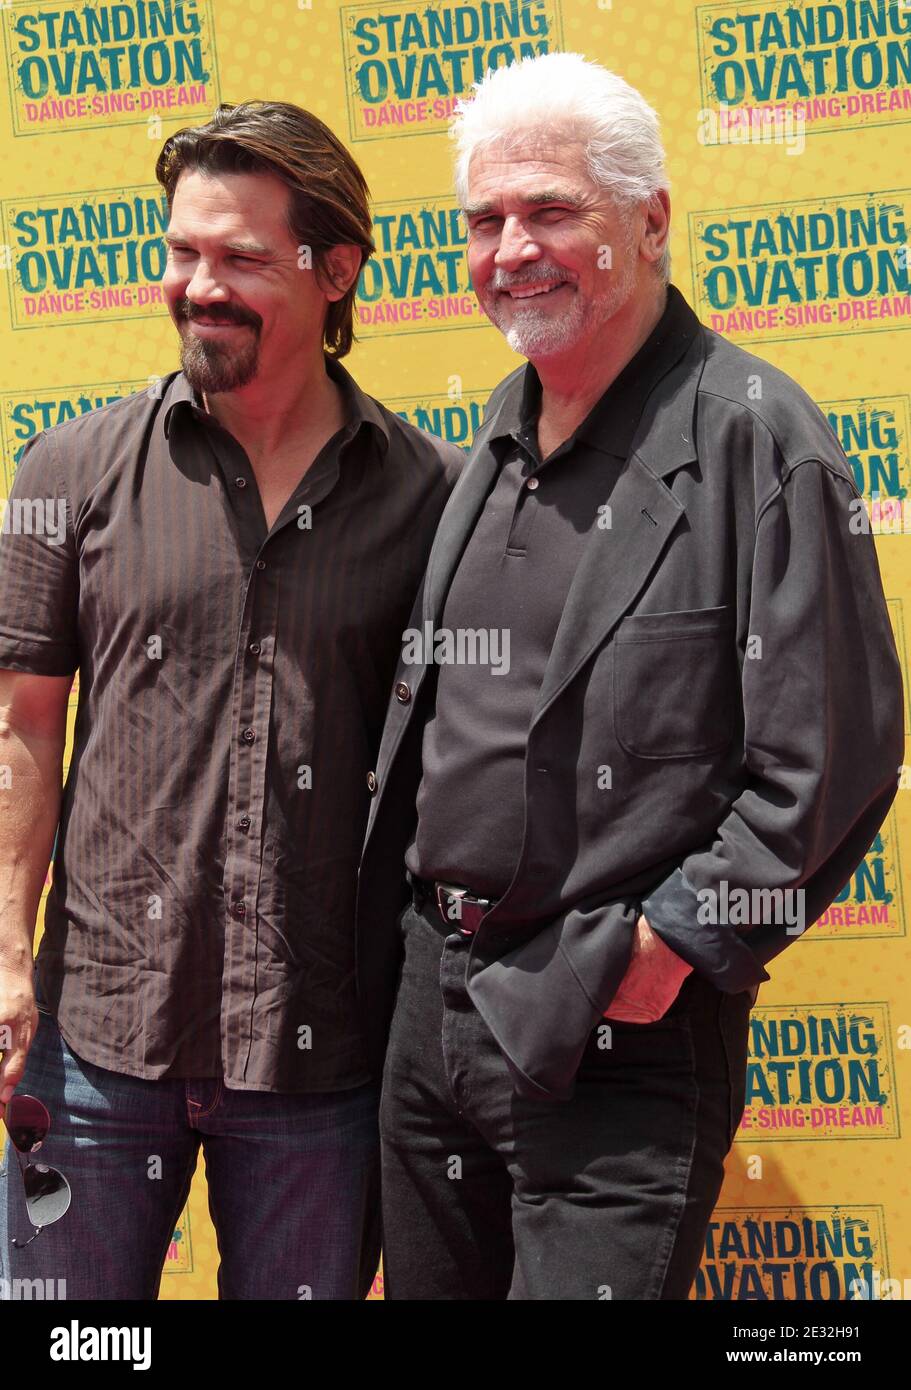 Josh Brolin, James Brolin at the film premiere for Standing Ovation, by Kenilworth Films, in Universal City, CA, USA, on July 10, 2010. (Pictured: Josh Brolin, James Brolin). Photo by Baxter/ABACAPRESS.COM Stock Photo